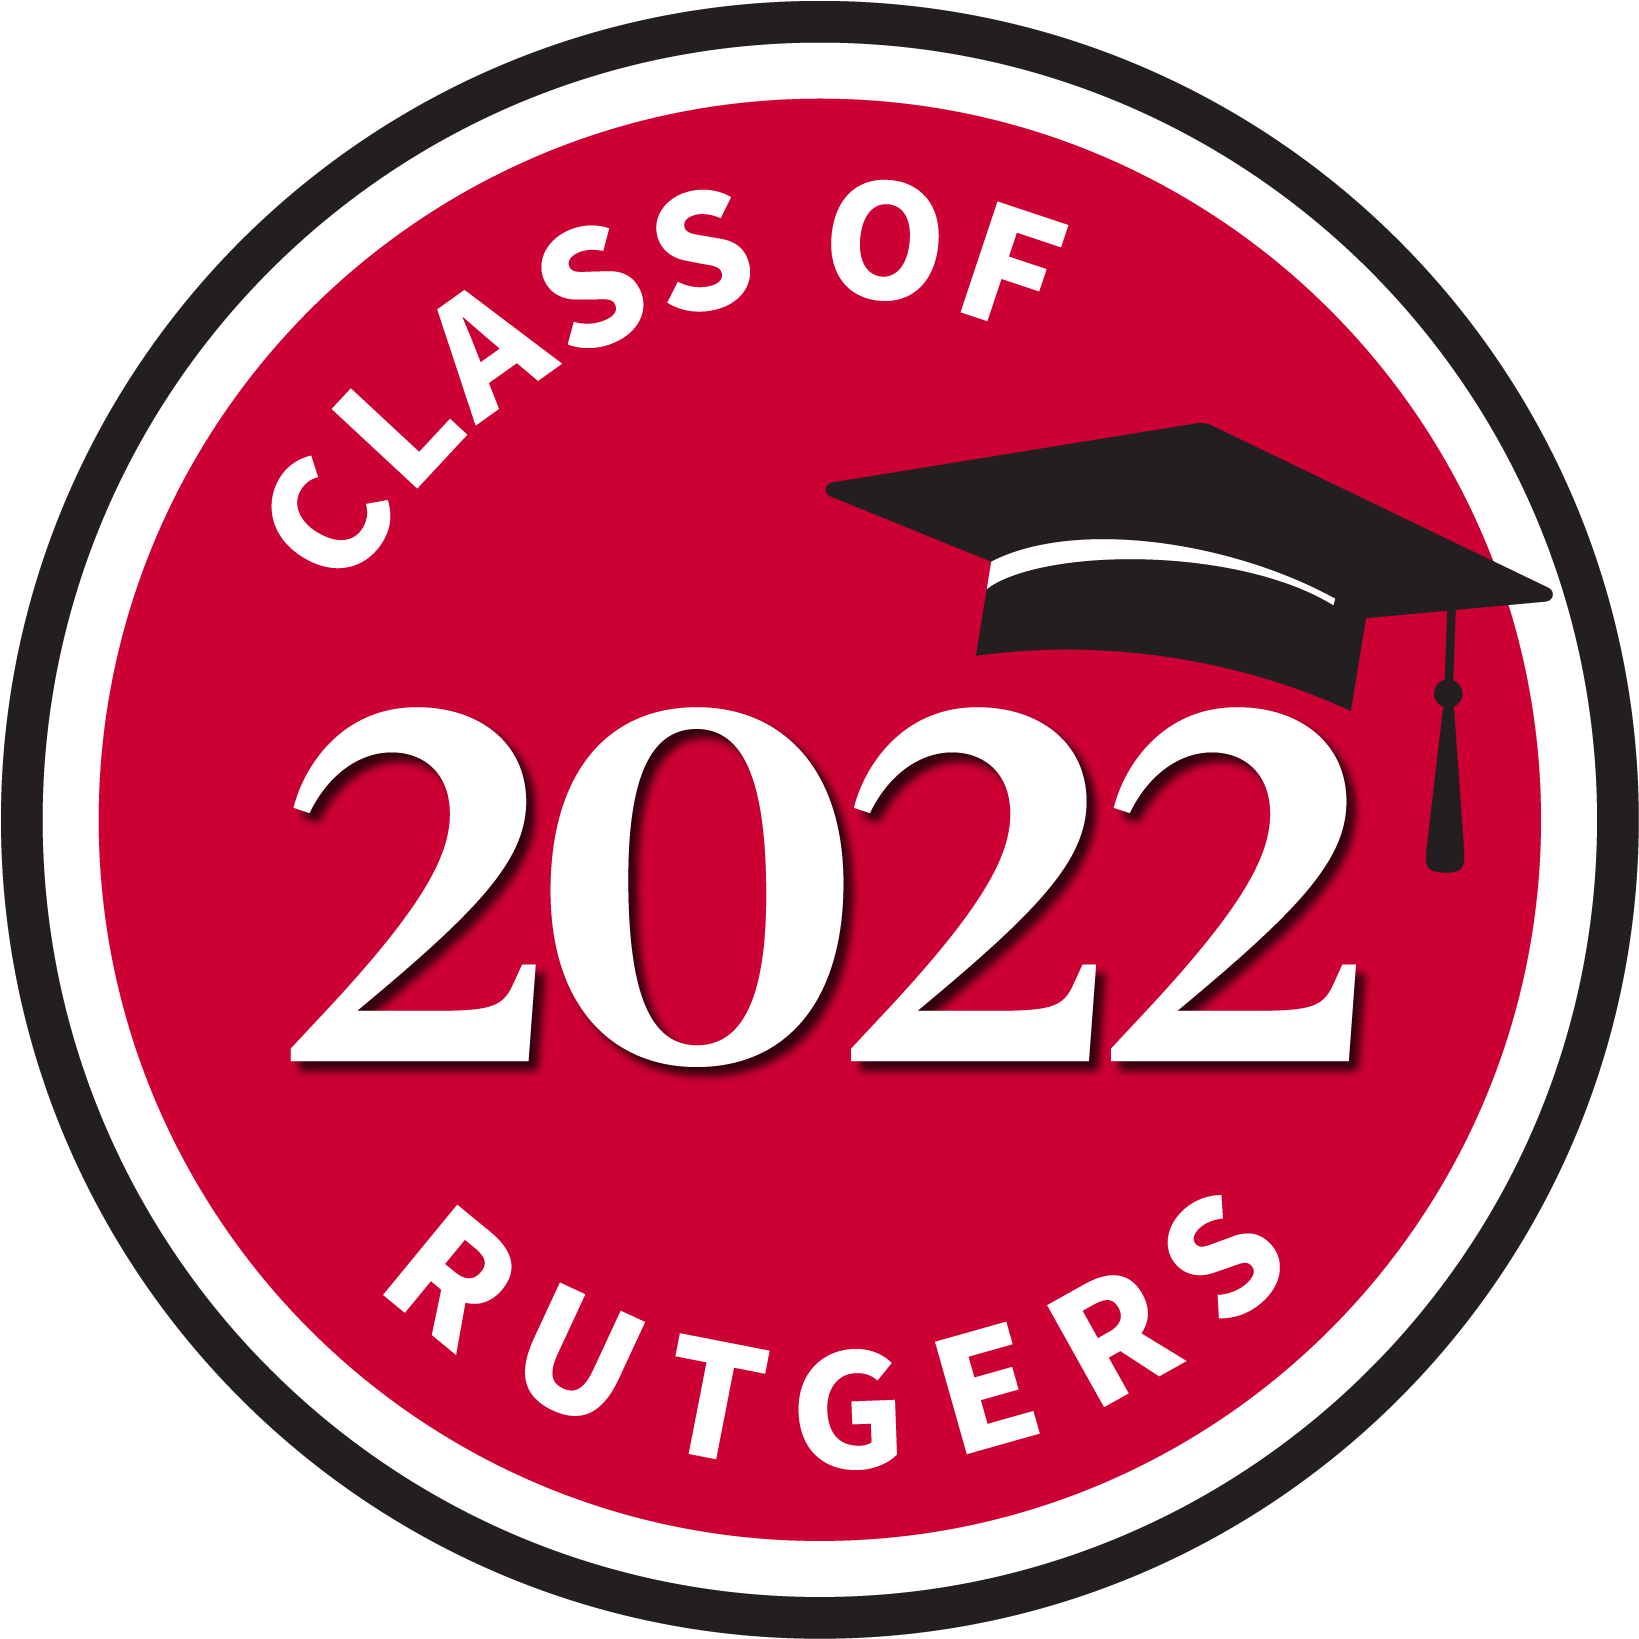 Rutgers Class of 2022 Student Profiles